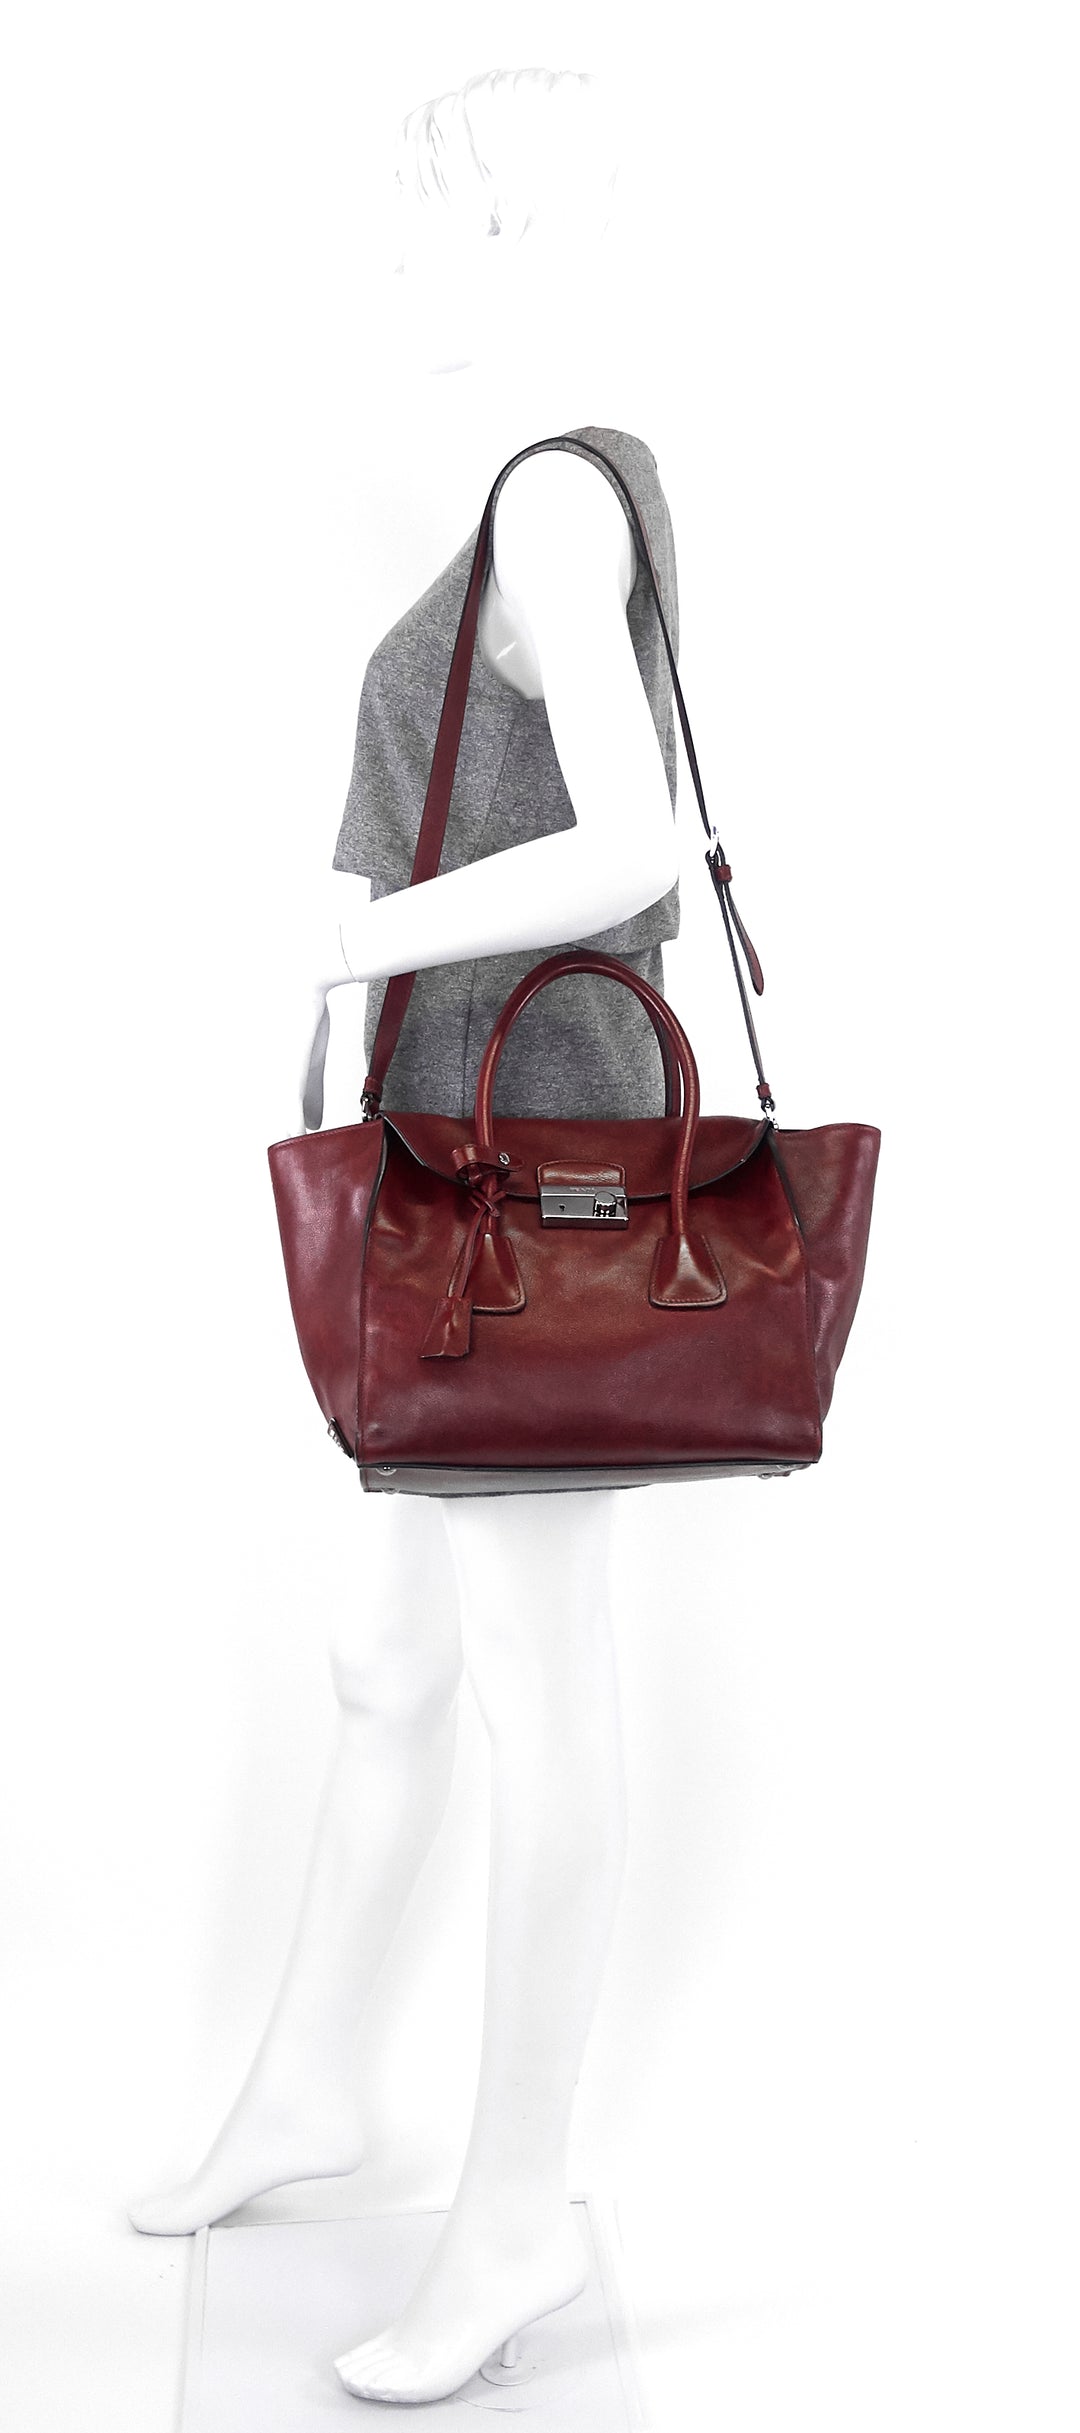 twin pocket large glace calf leather tote bag